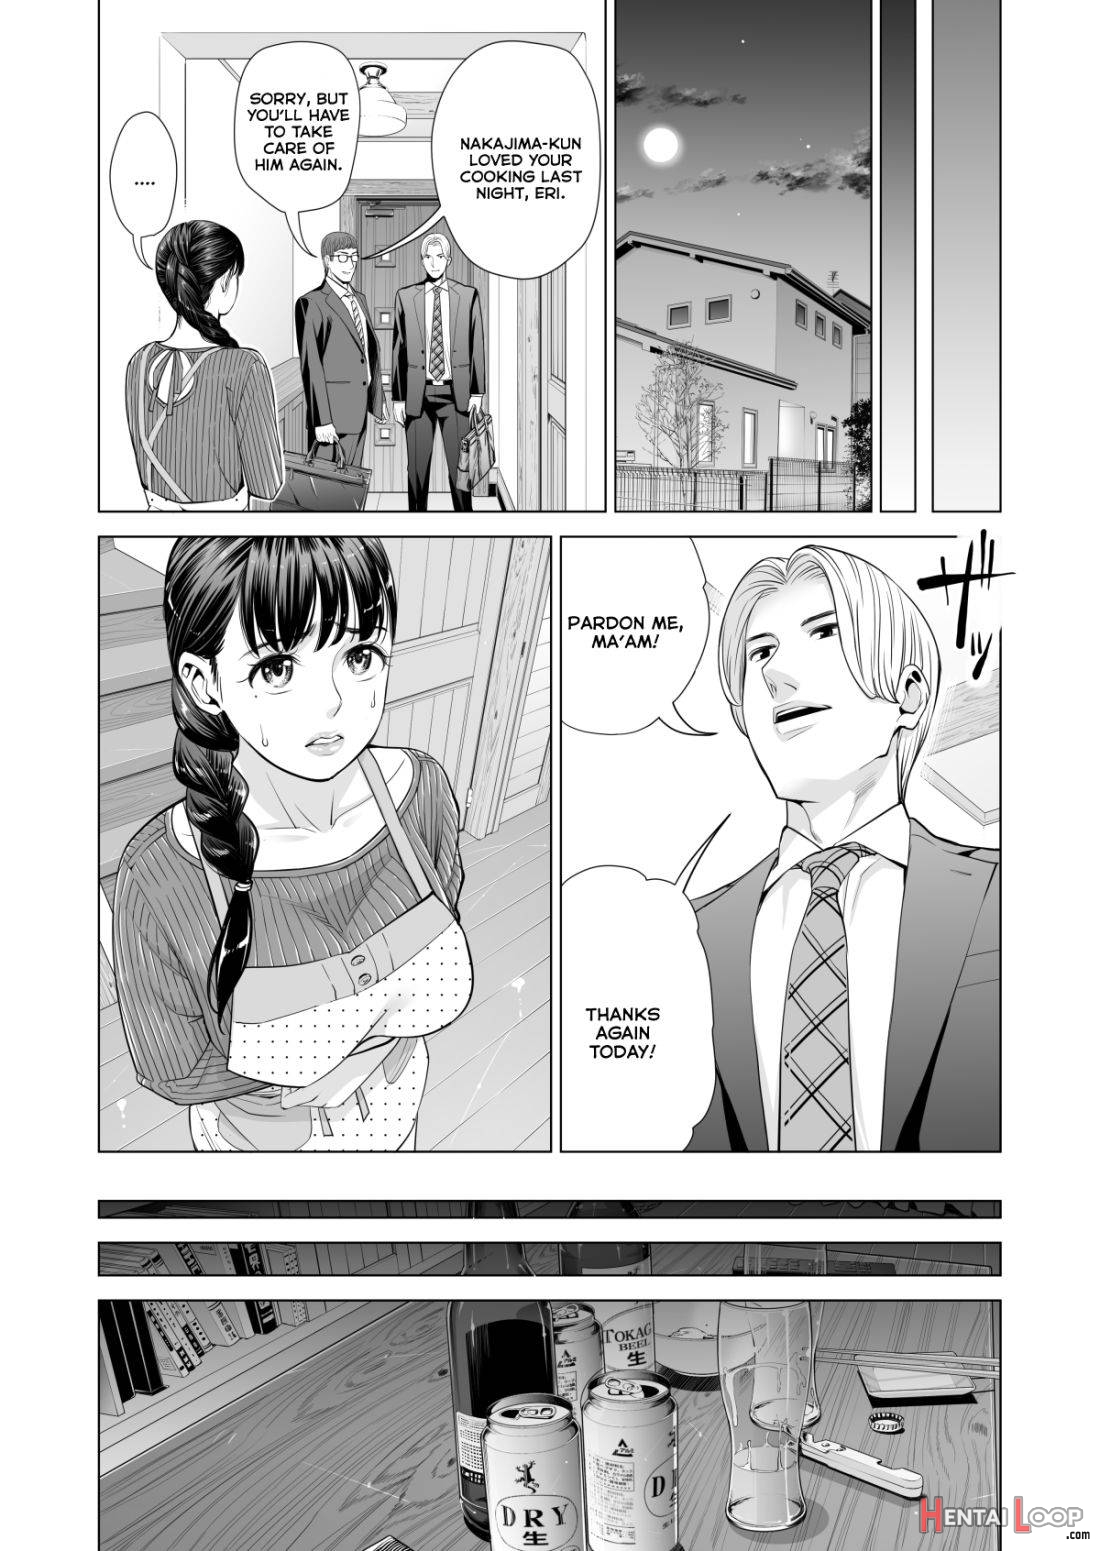 Tsukiyo no Midare Zake (Kouhen) Moonlit Intoxication ~ A Housewife Stolen by a Coworker Besides her Blackout Drunk Husband ~ Chapter 2 page 9